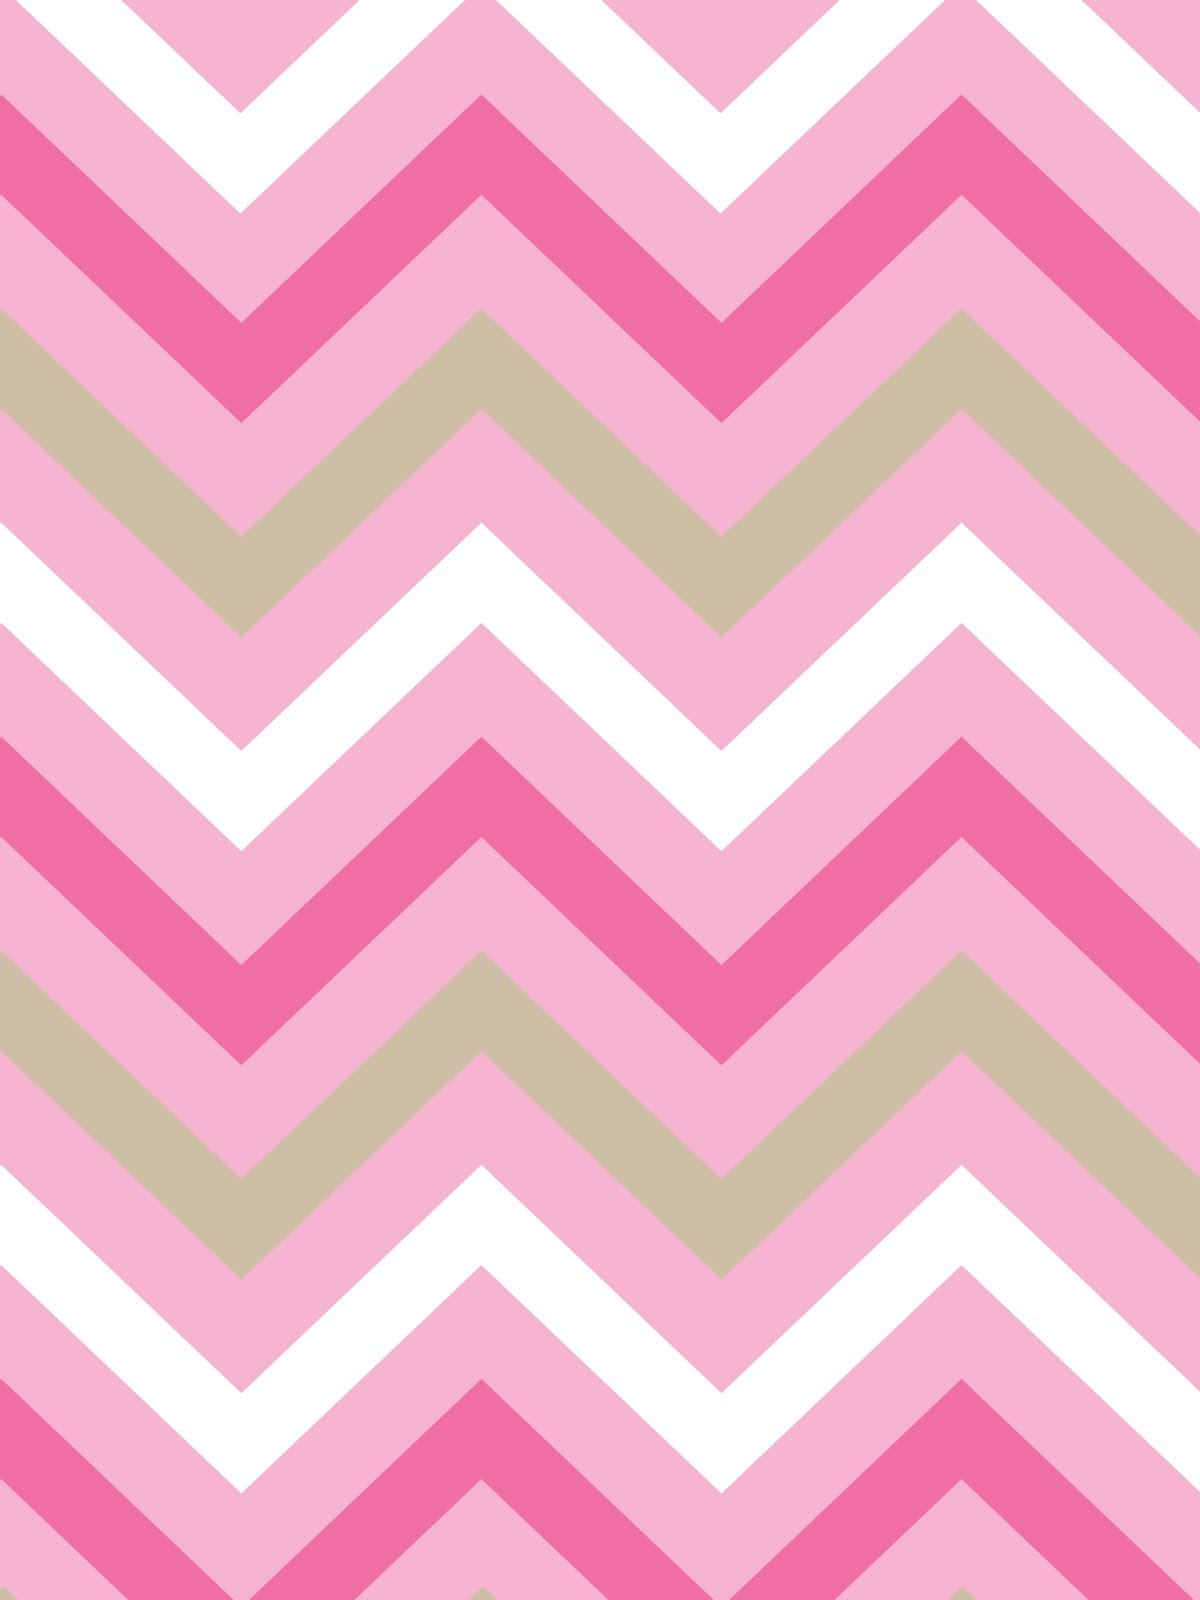 Hot Pink Chevron Ombre Fade Fabric | Pink chevron wallpaper, Chevron  wallpaper, Chevron decor